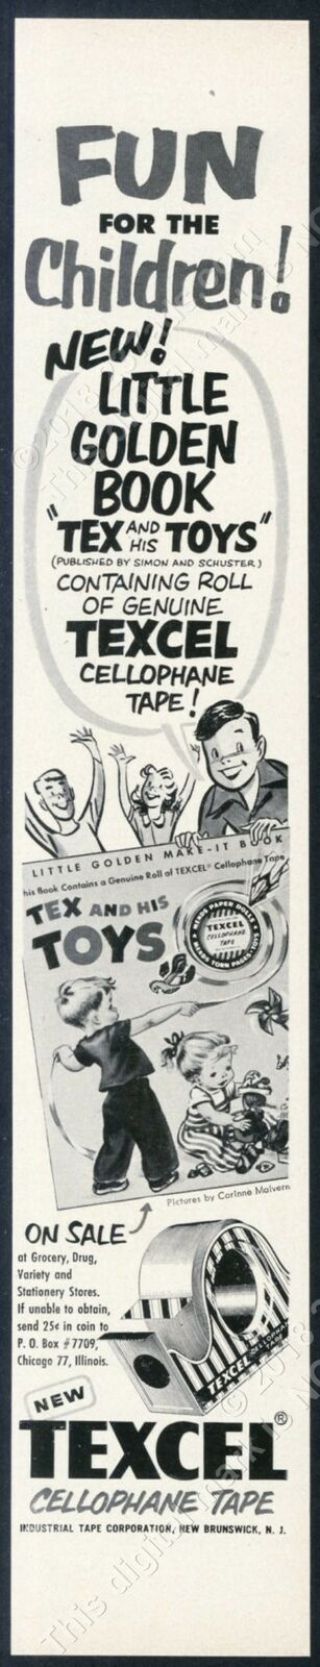 1952 Texcel Tape Little Golden Book Tex And His Toys Promo Vintage Print Ad